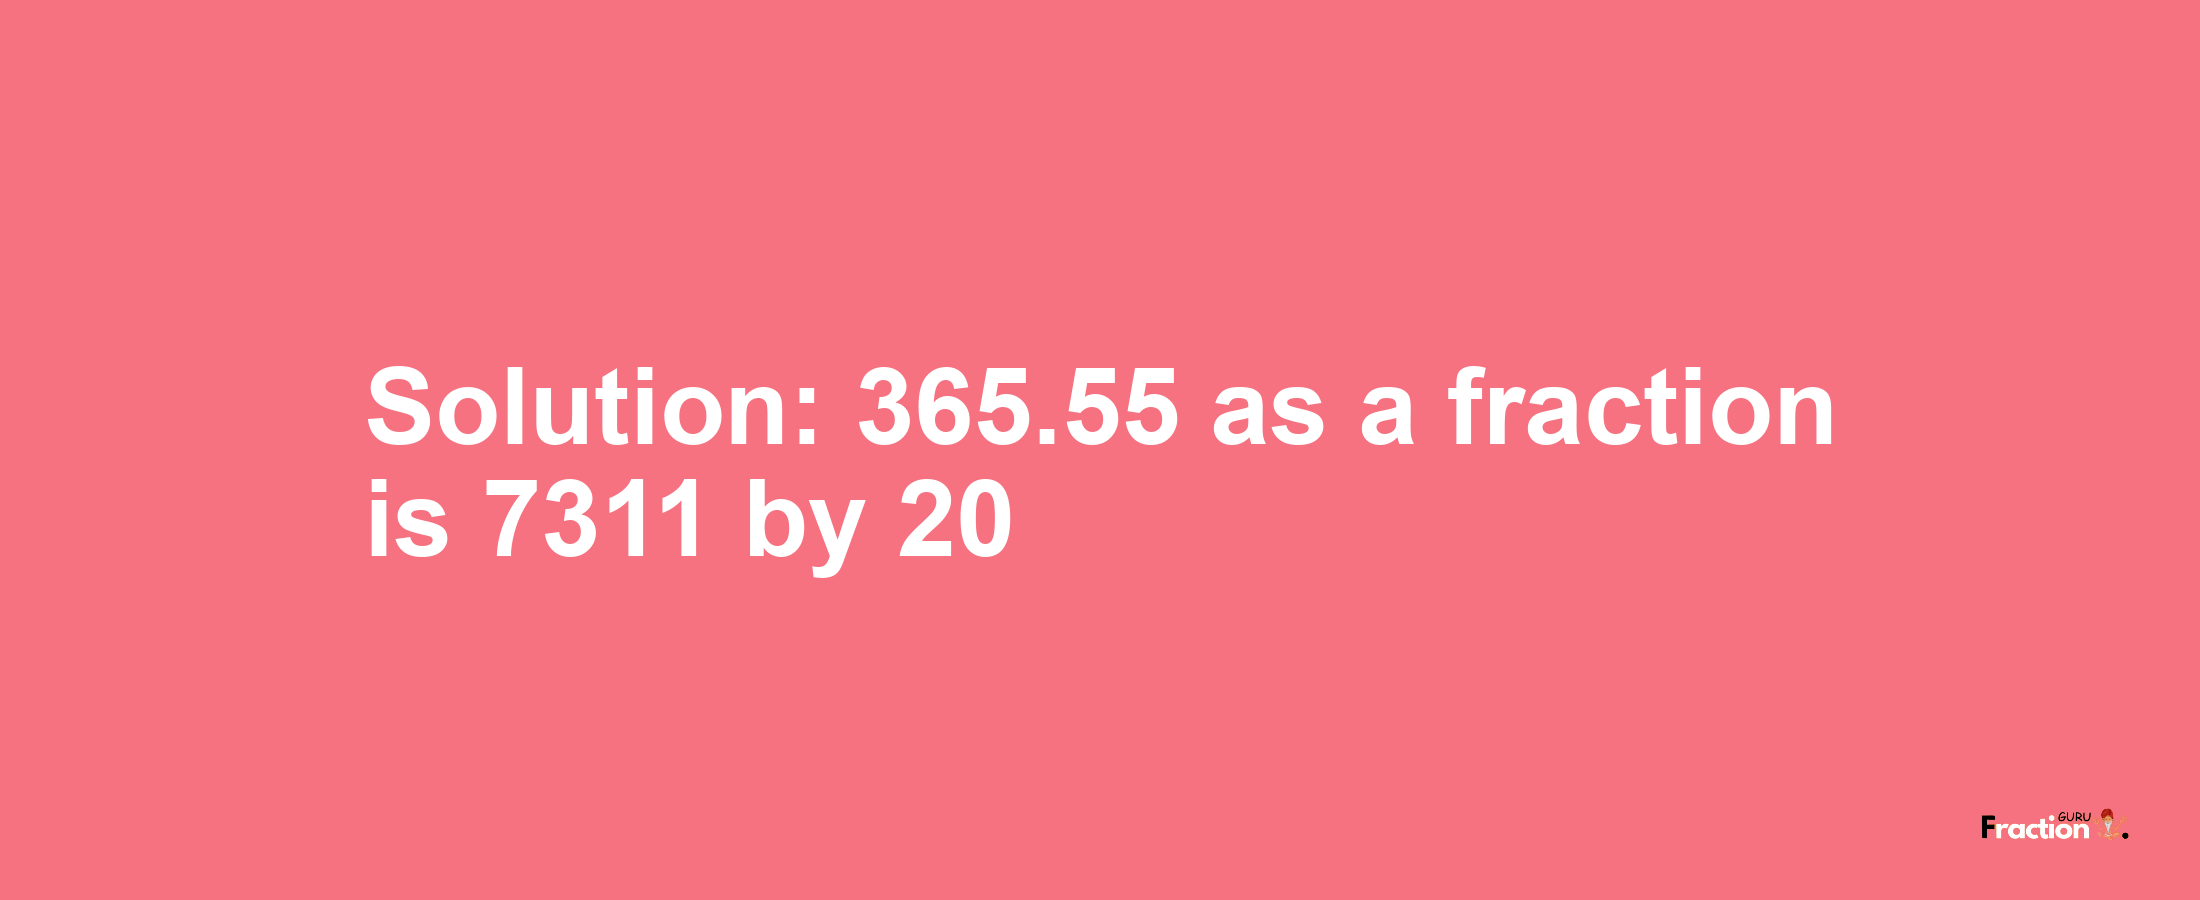 Solution:365.55 as a fraction is 7311/20